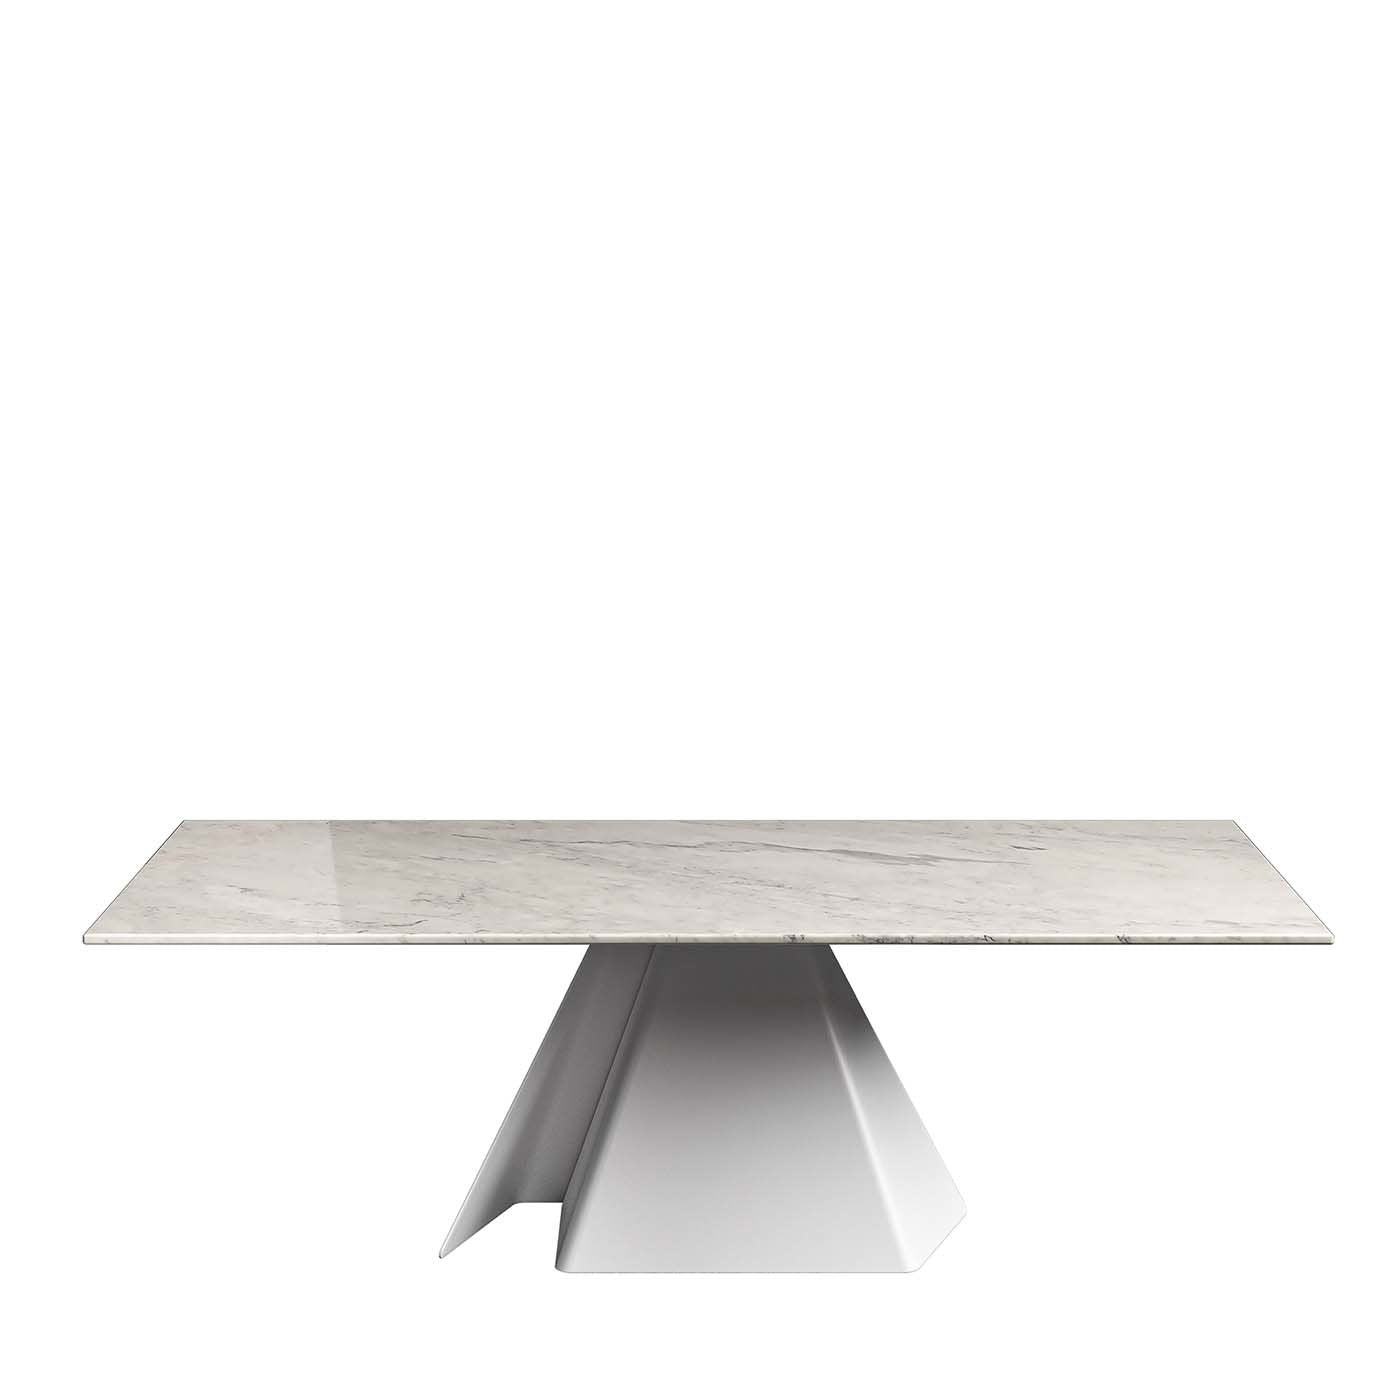 Papier Table White by Andrea Casati  - Main view